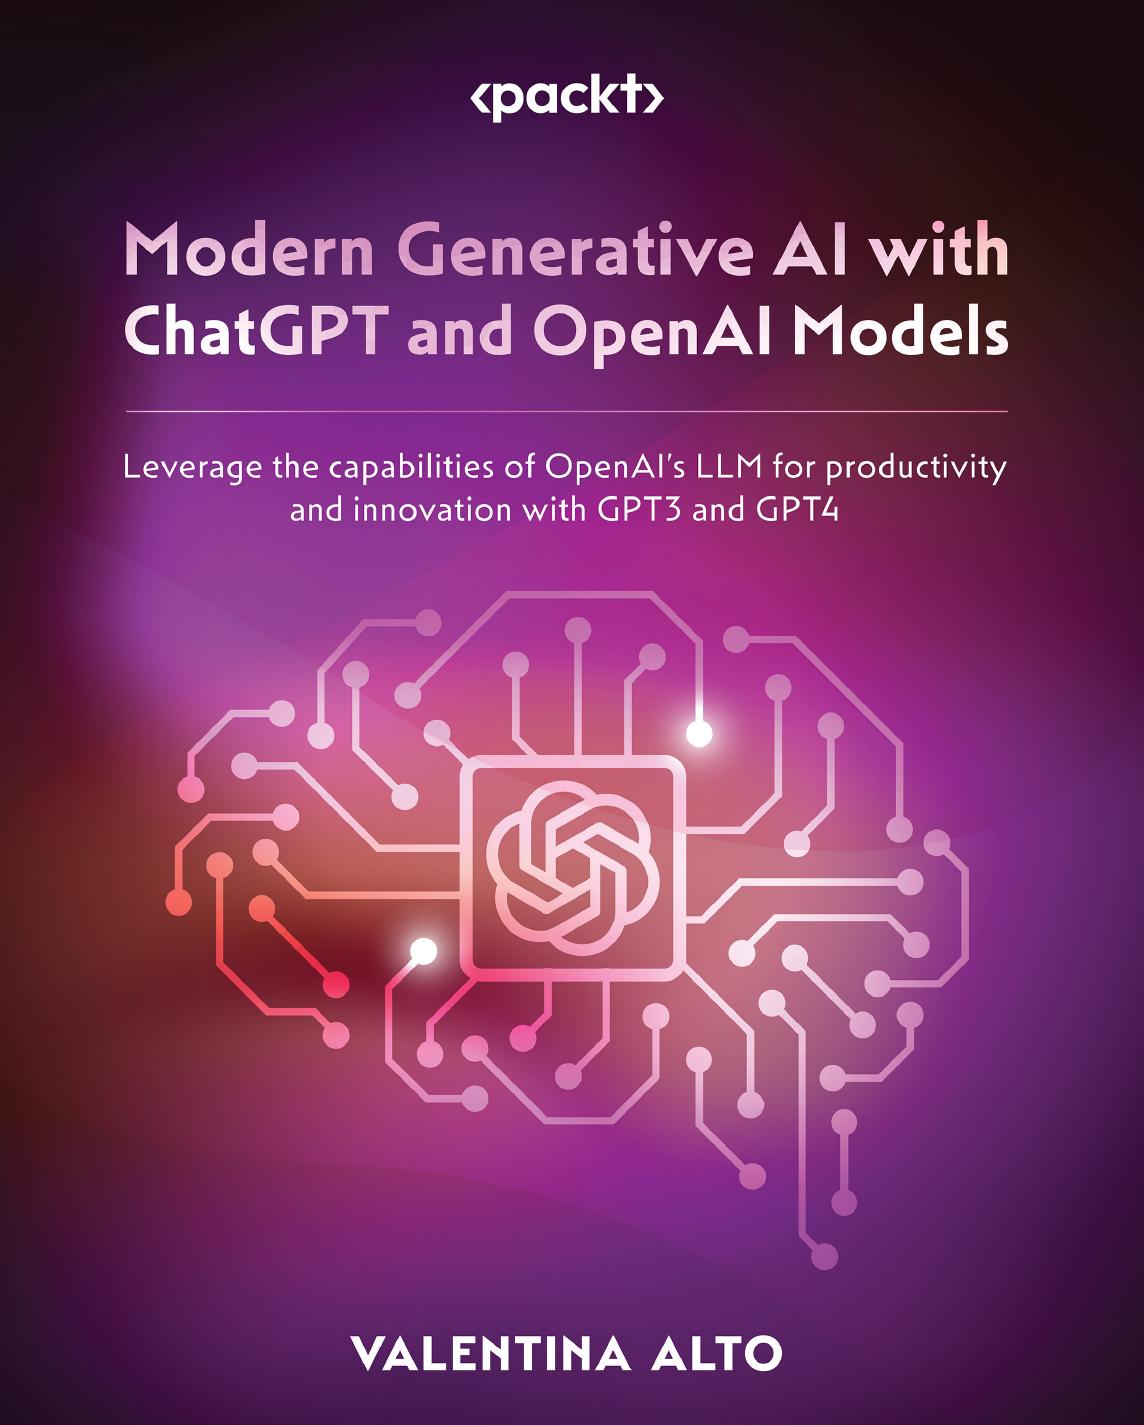 Modern Generative AI with ChatGPT and OpenAI Models: Leverage the capabilities of OpenAI's LLM for productivity and innovation with GPT3 and GPT4 by Valentina Alto